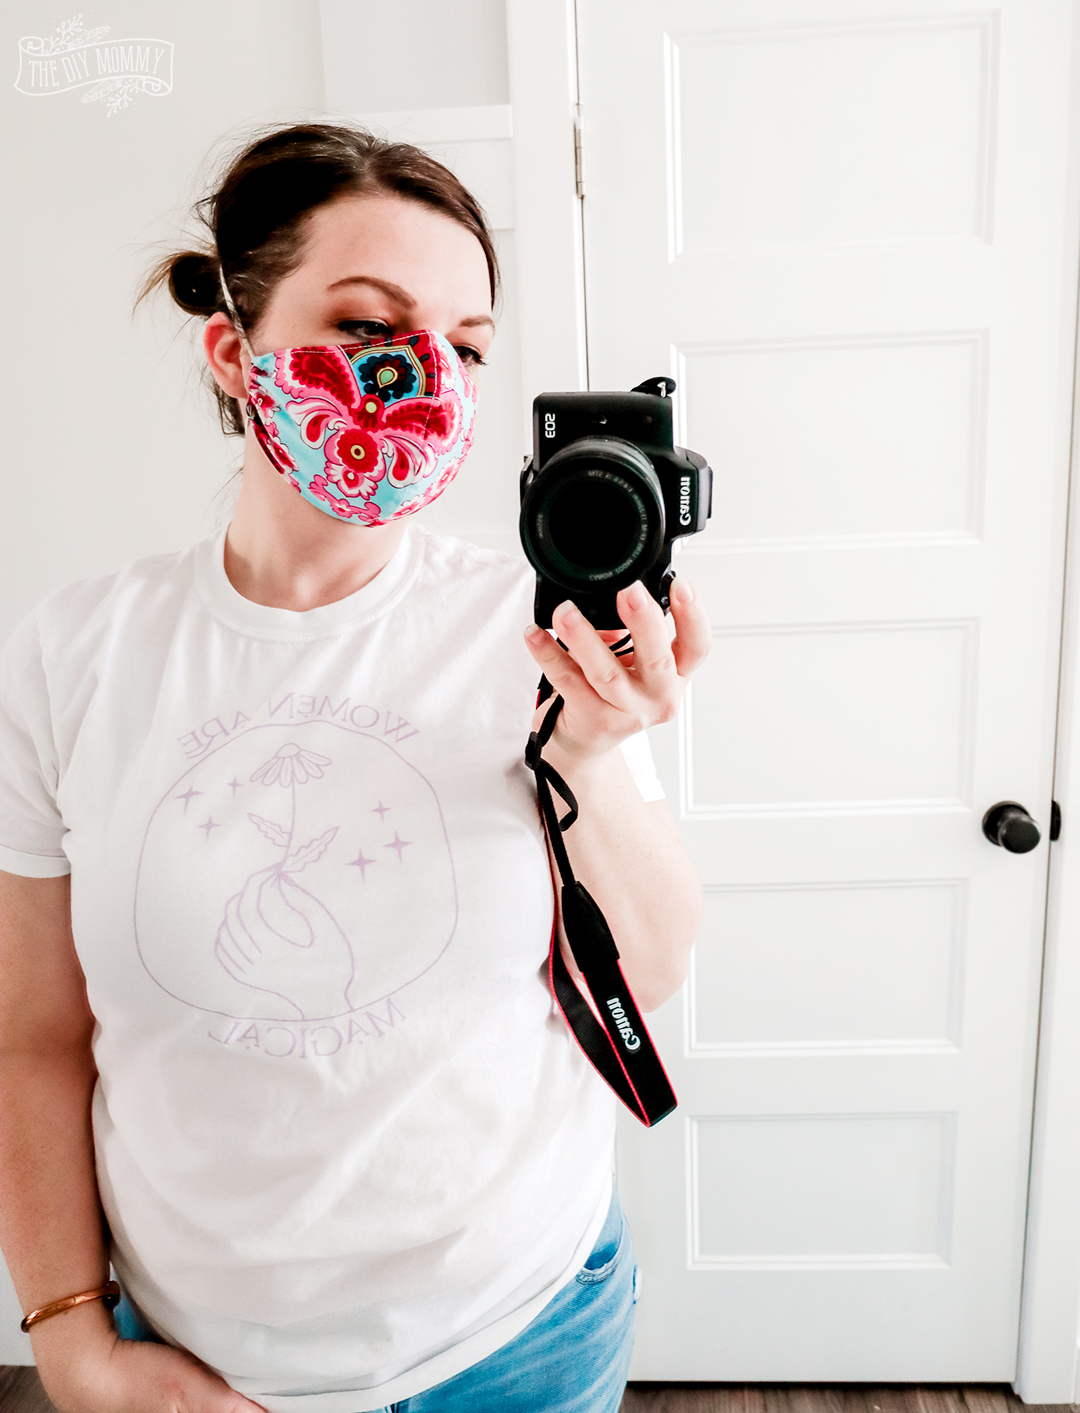 Learn how to sew a DIY fabric face mask with a close fit, elastic straps and a pocket for a filter